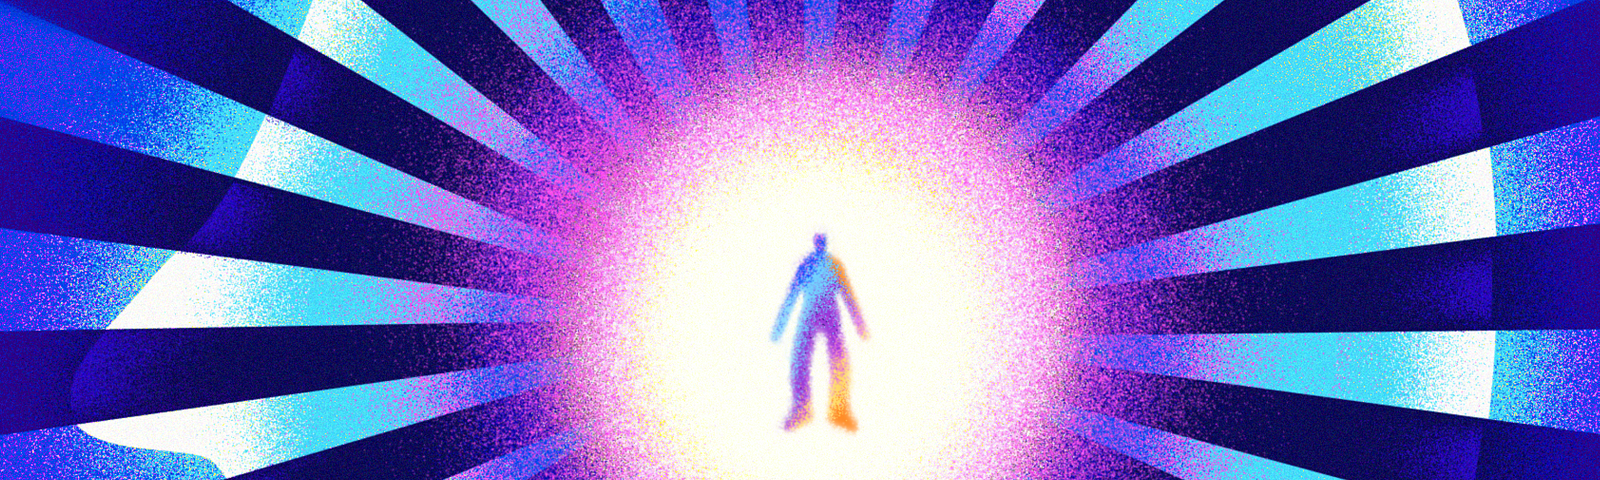 a person floating in a gradient orb with lines projecting out of it